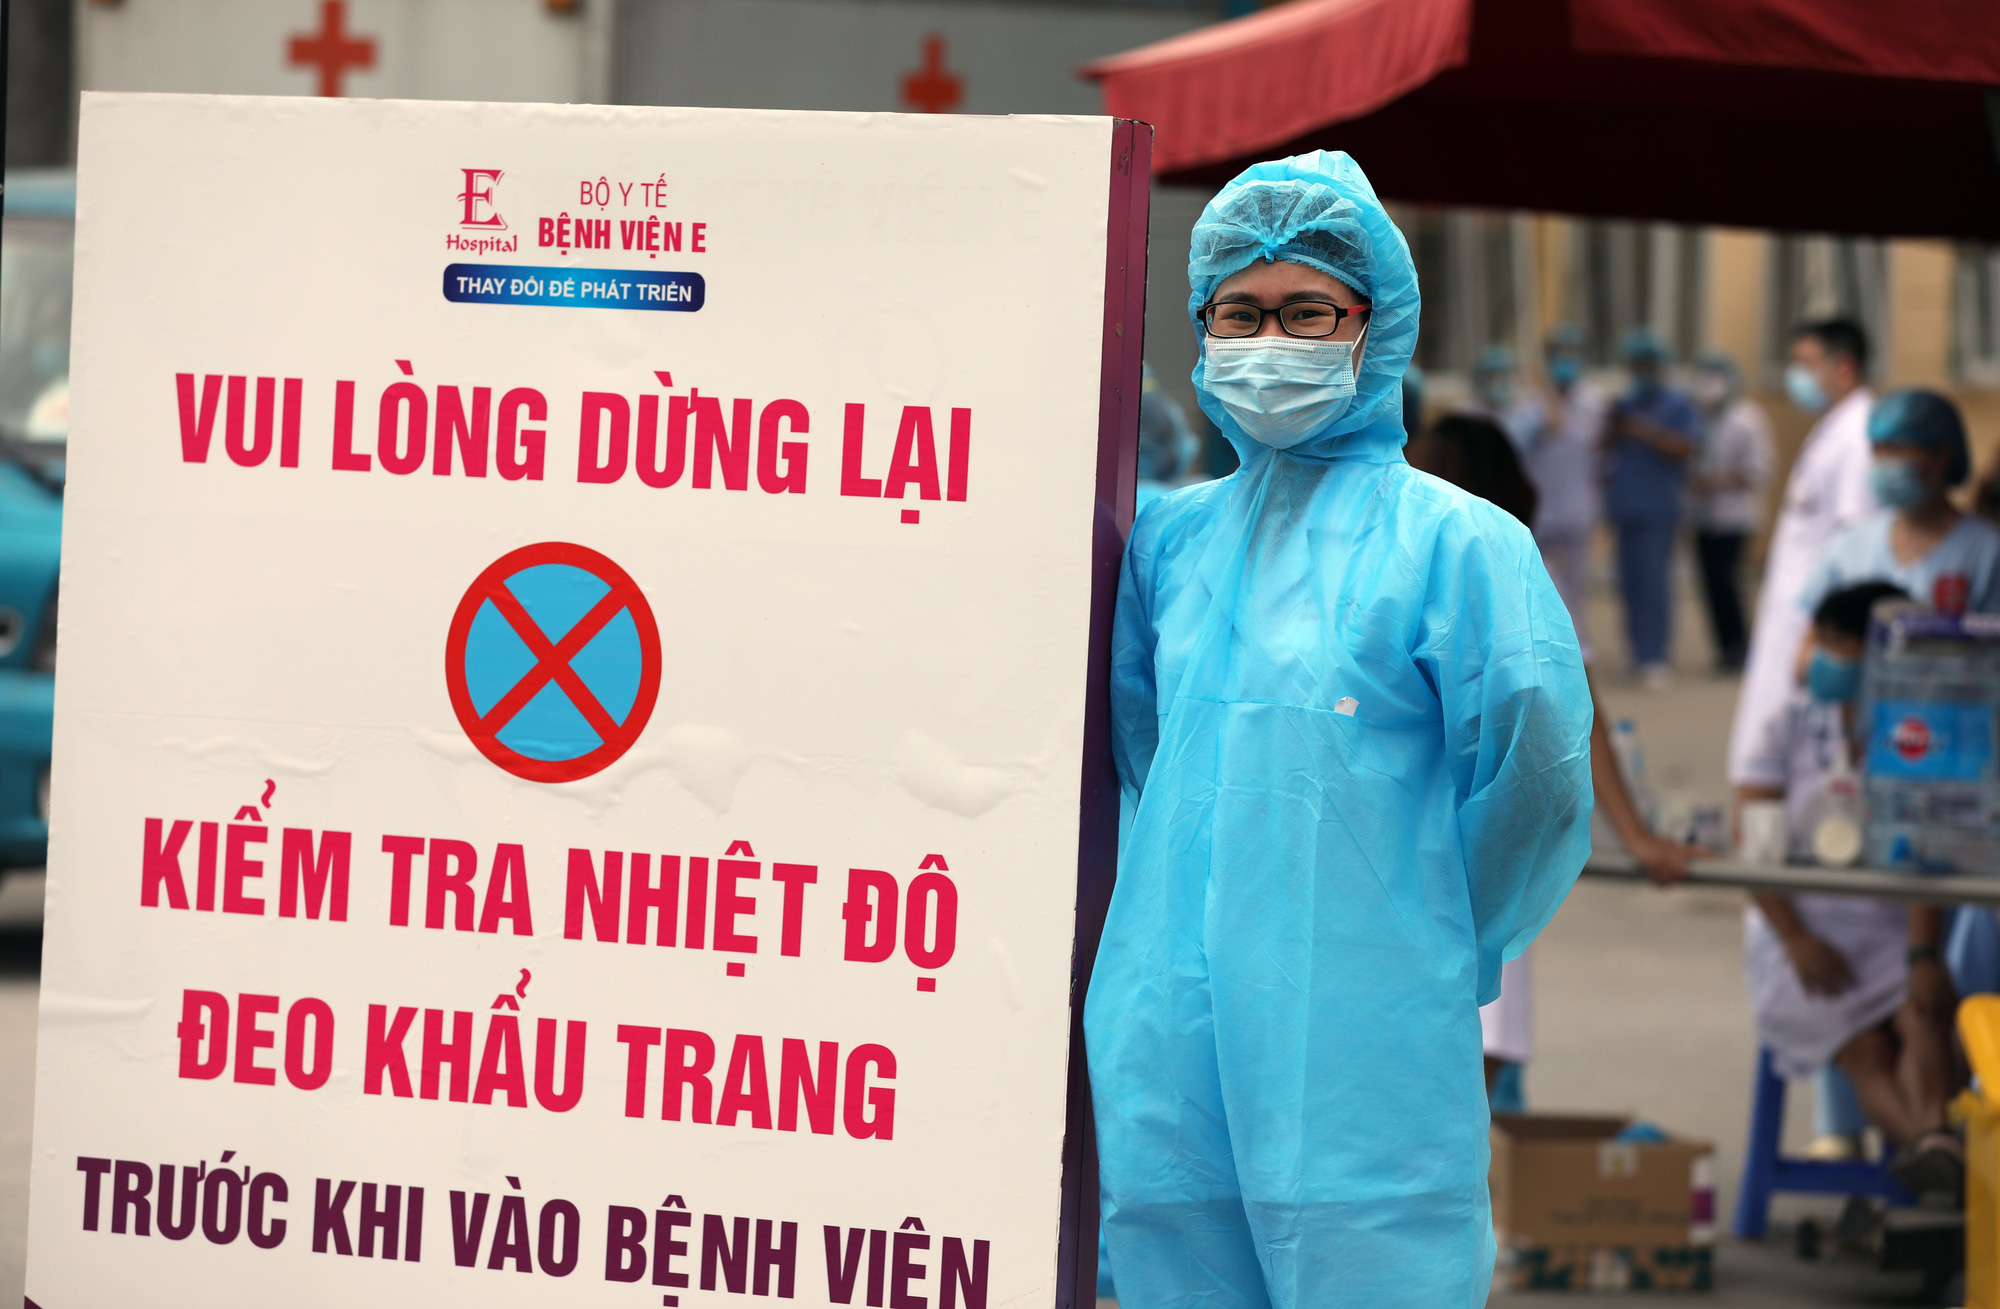 Vietnam records 8 imported COVID-19 cases, tally now 1,168